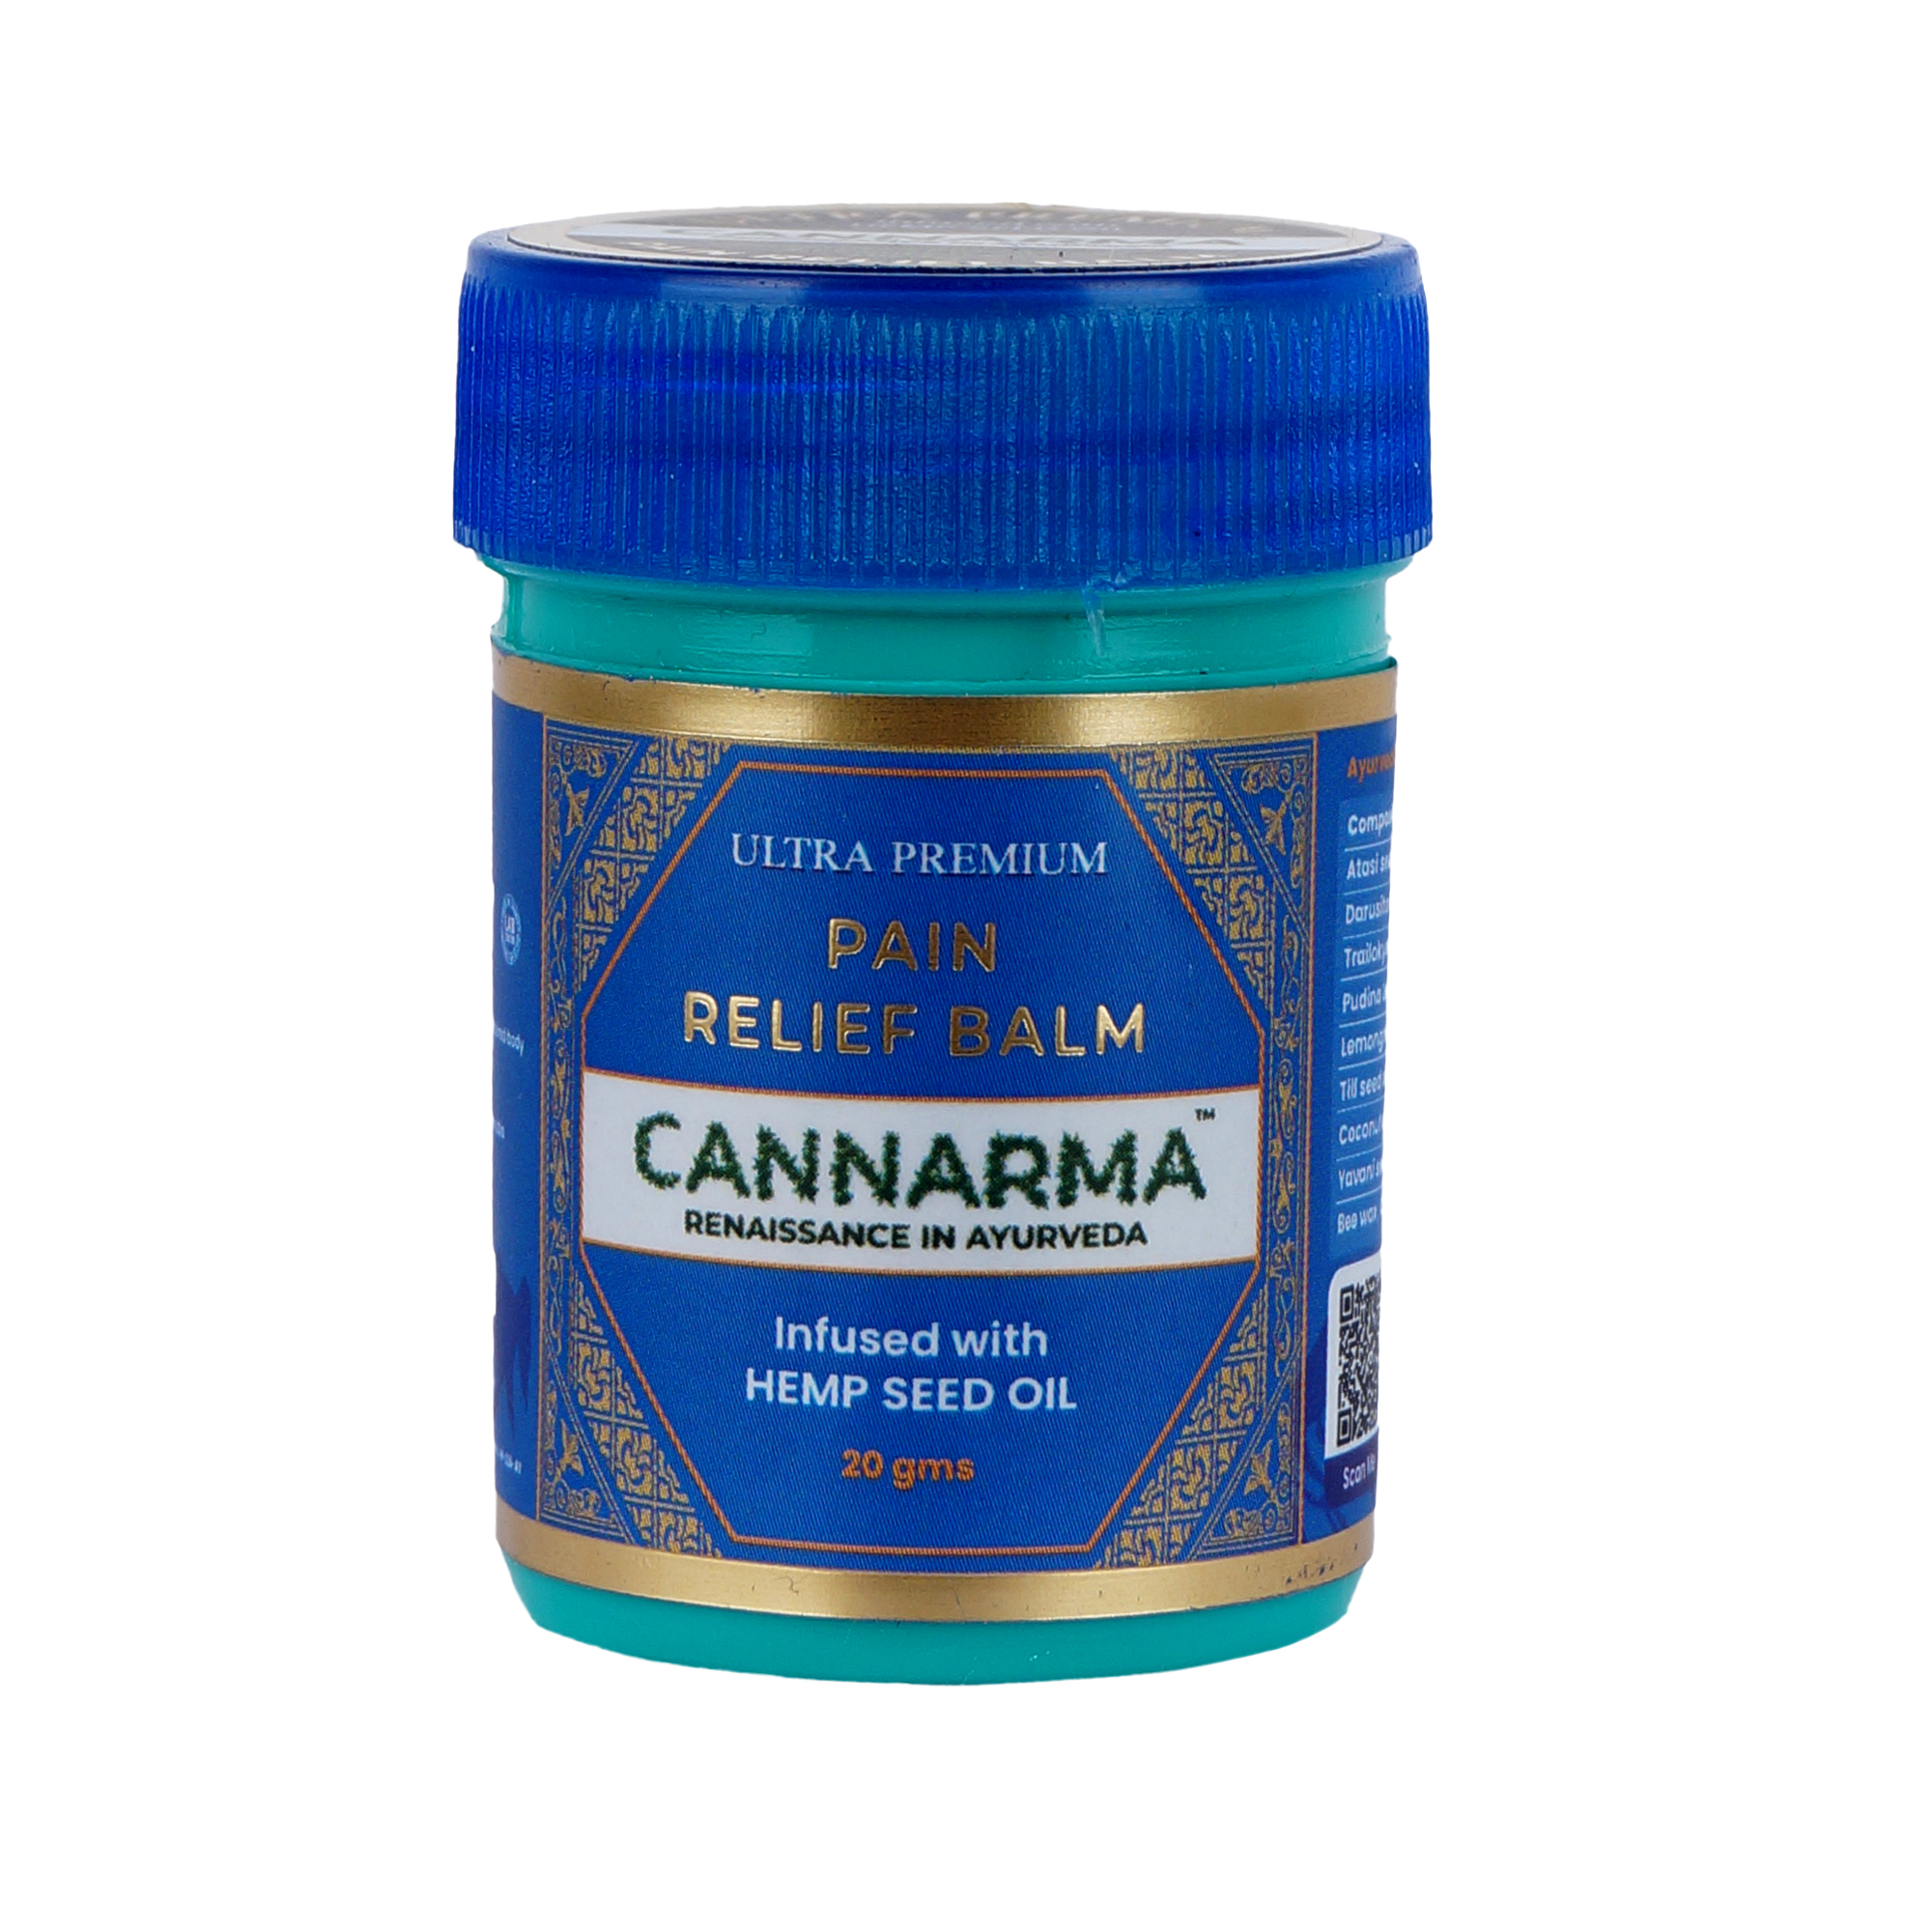 Buy Cannarma ULTRA PREMIUM Pain Relief Balm at Best Price Online